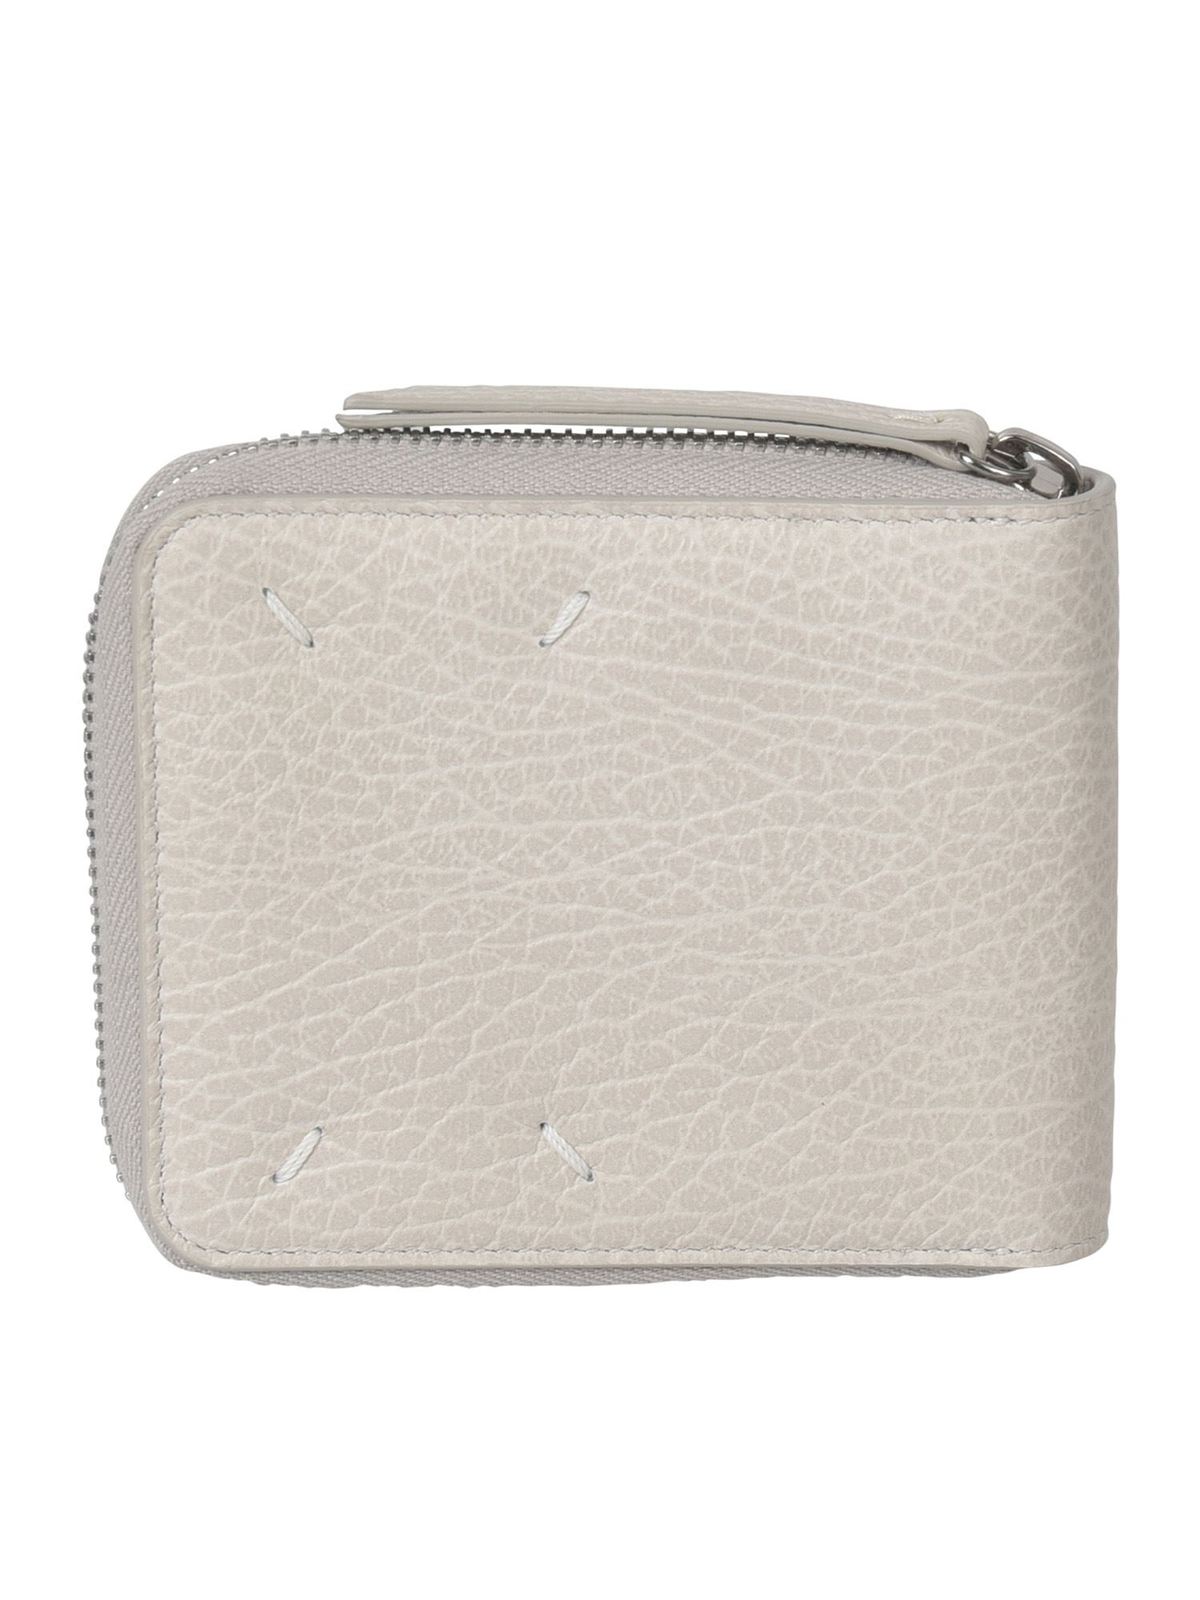 Small zip around wallet in ivory color